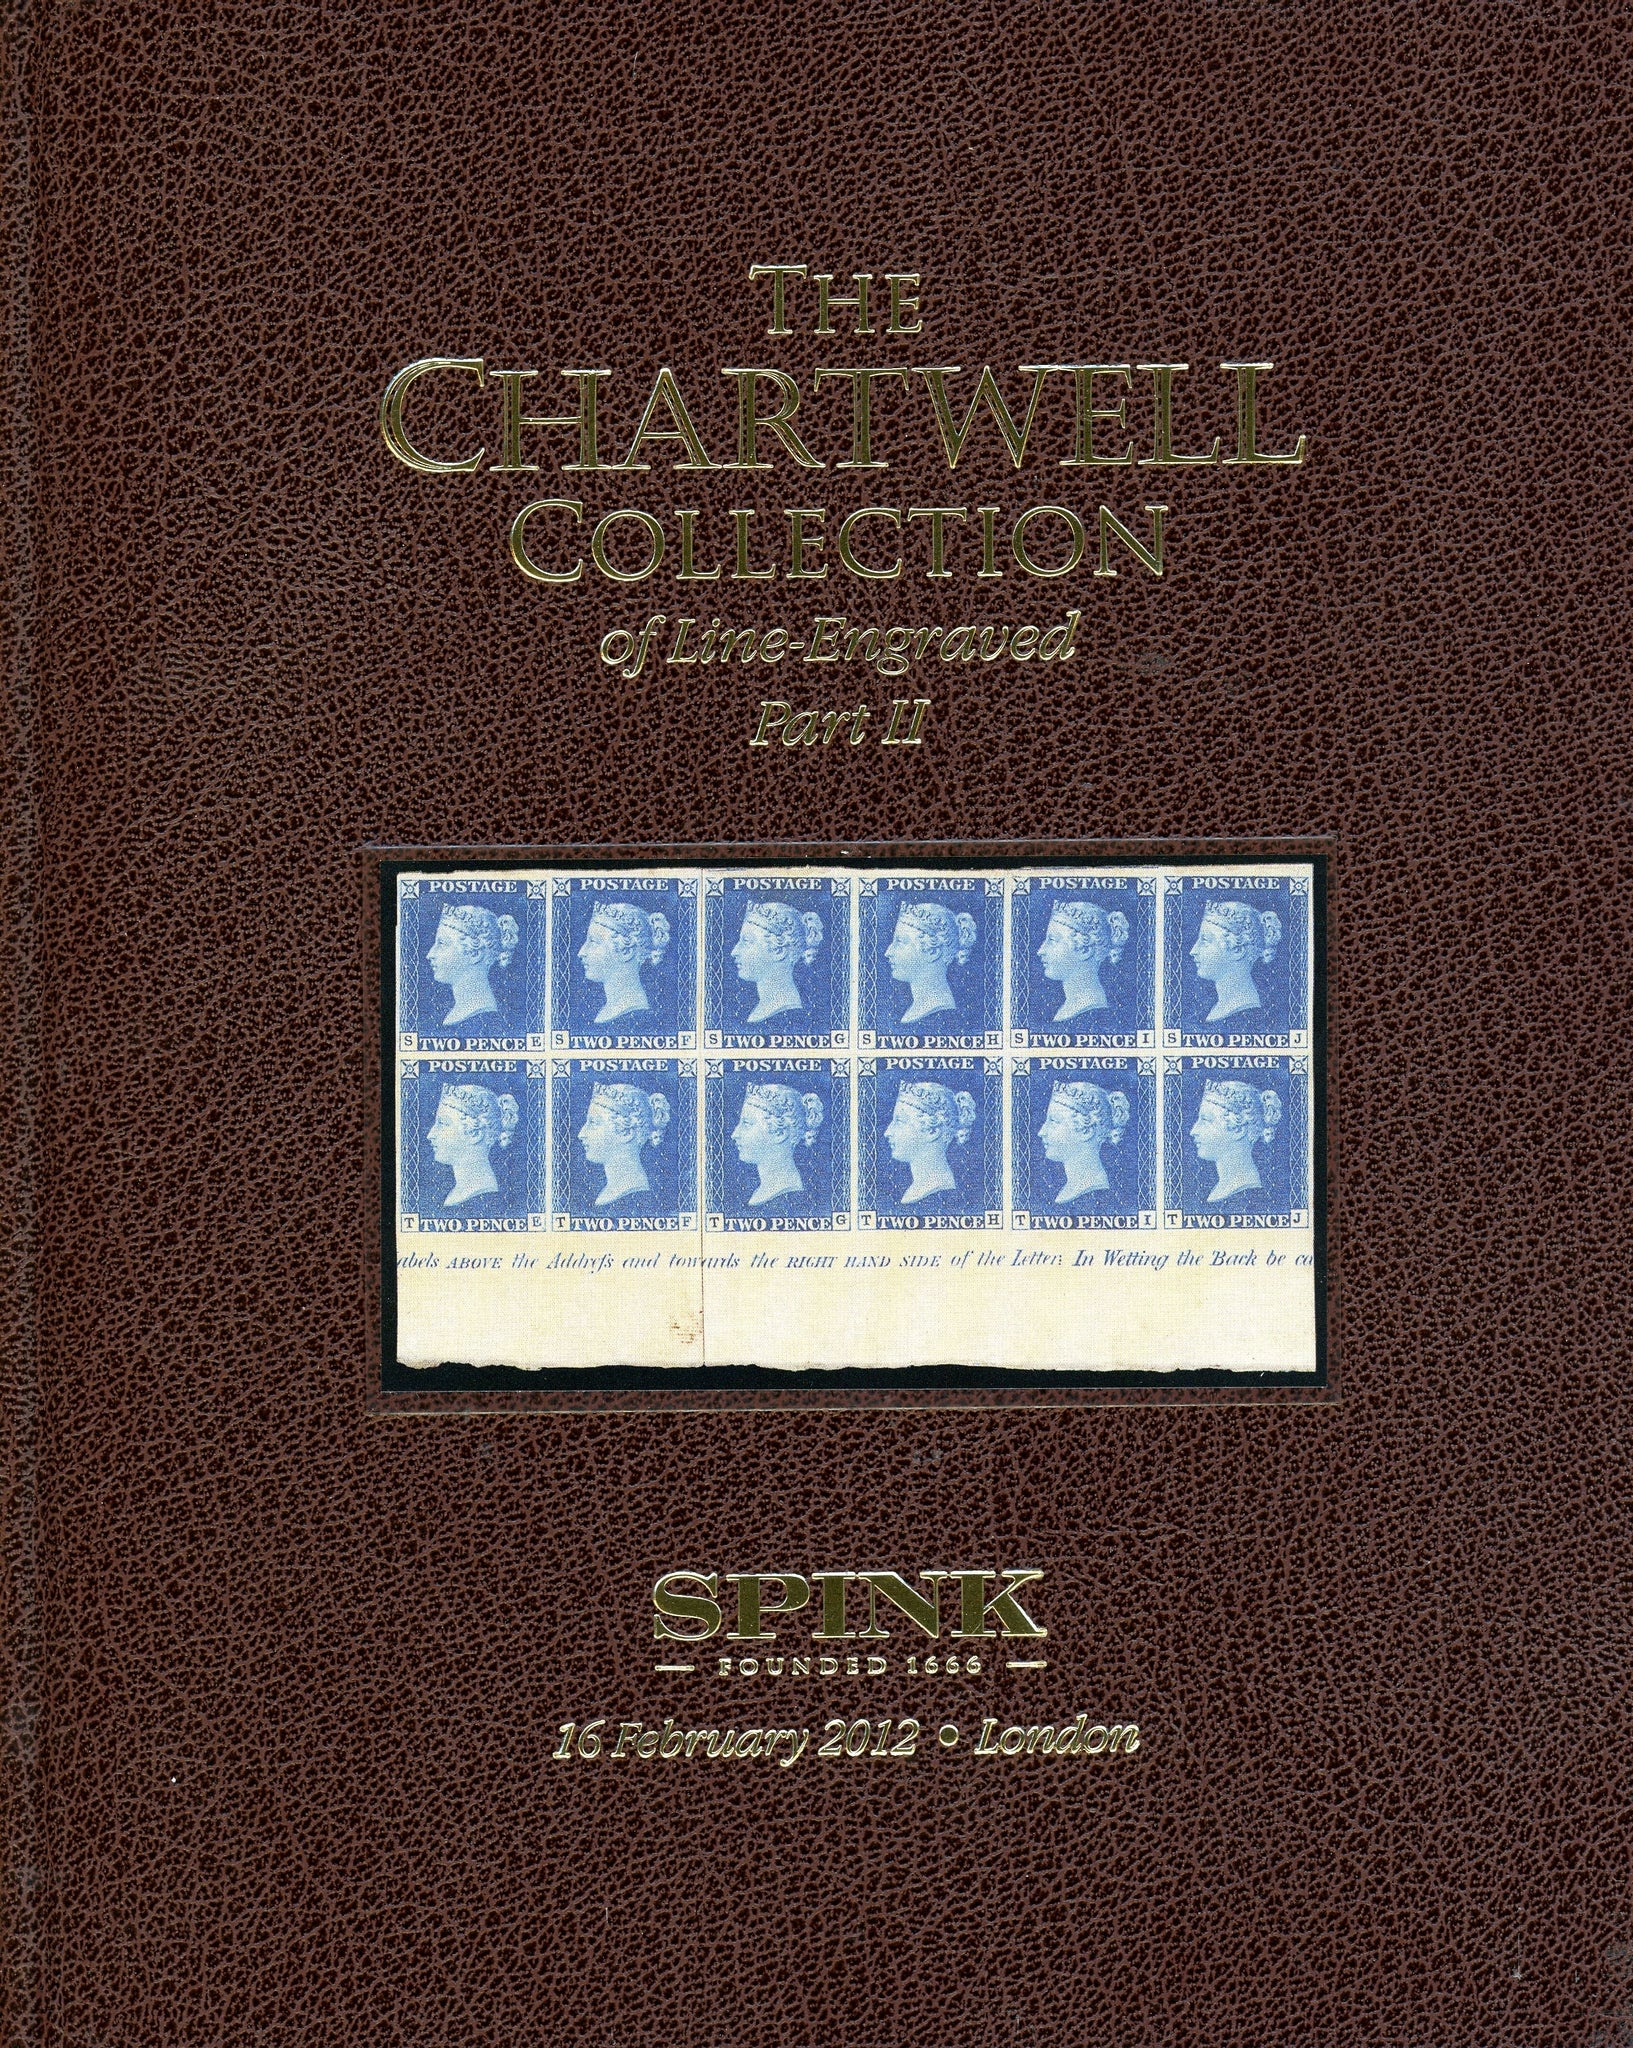 The Chartwell Collection of Line Engraved Part II Vol 5 - 16 February 2012 Spink London